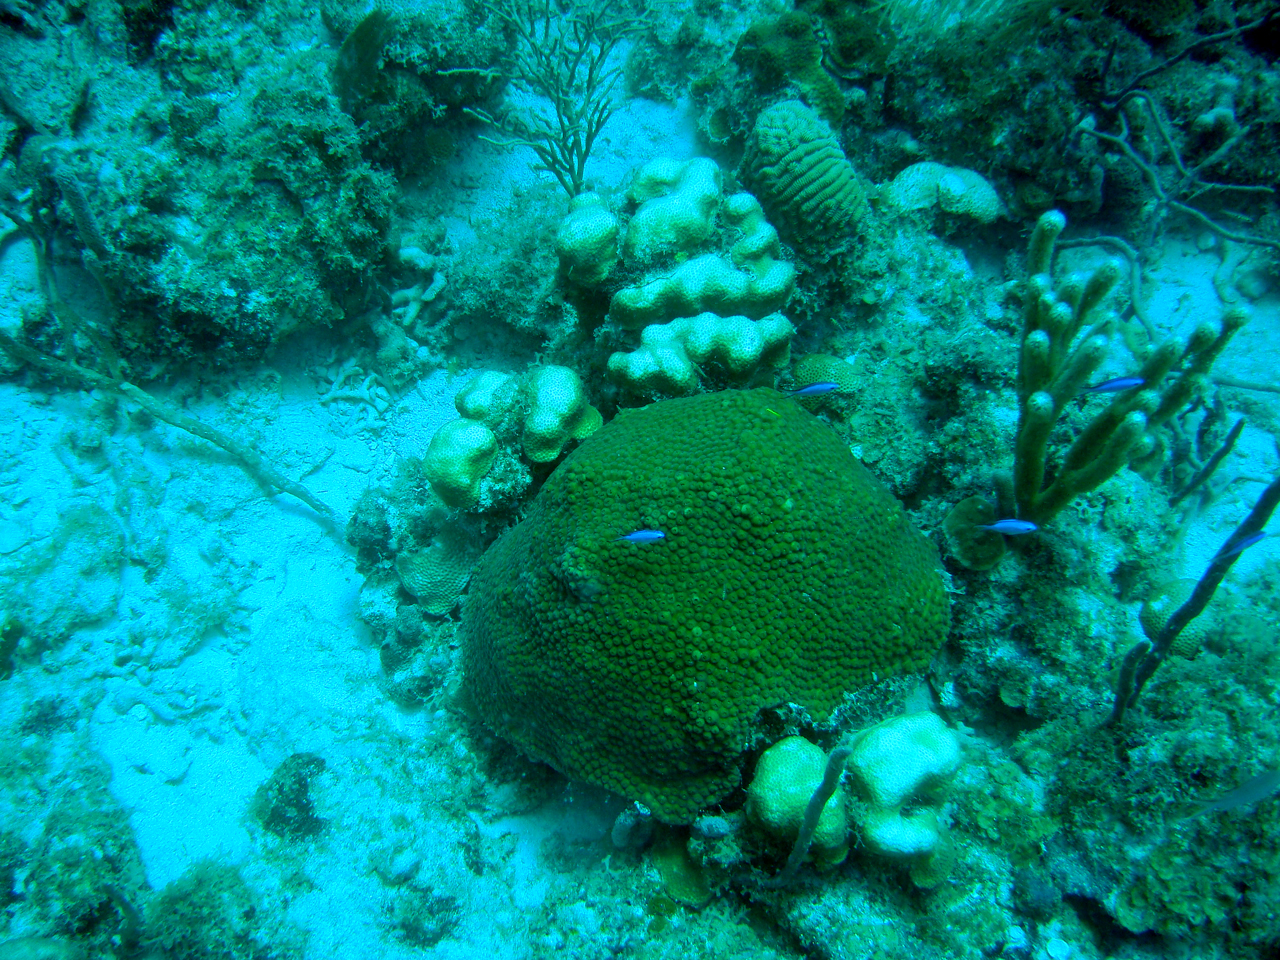 This photo shows the smaller star coral colonies (knobby colonies around the middle colony) are pale on the top, showing initial signs of bleaching. Photo courtesy Jeff Miller.